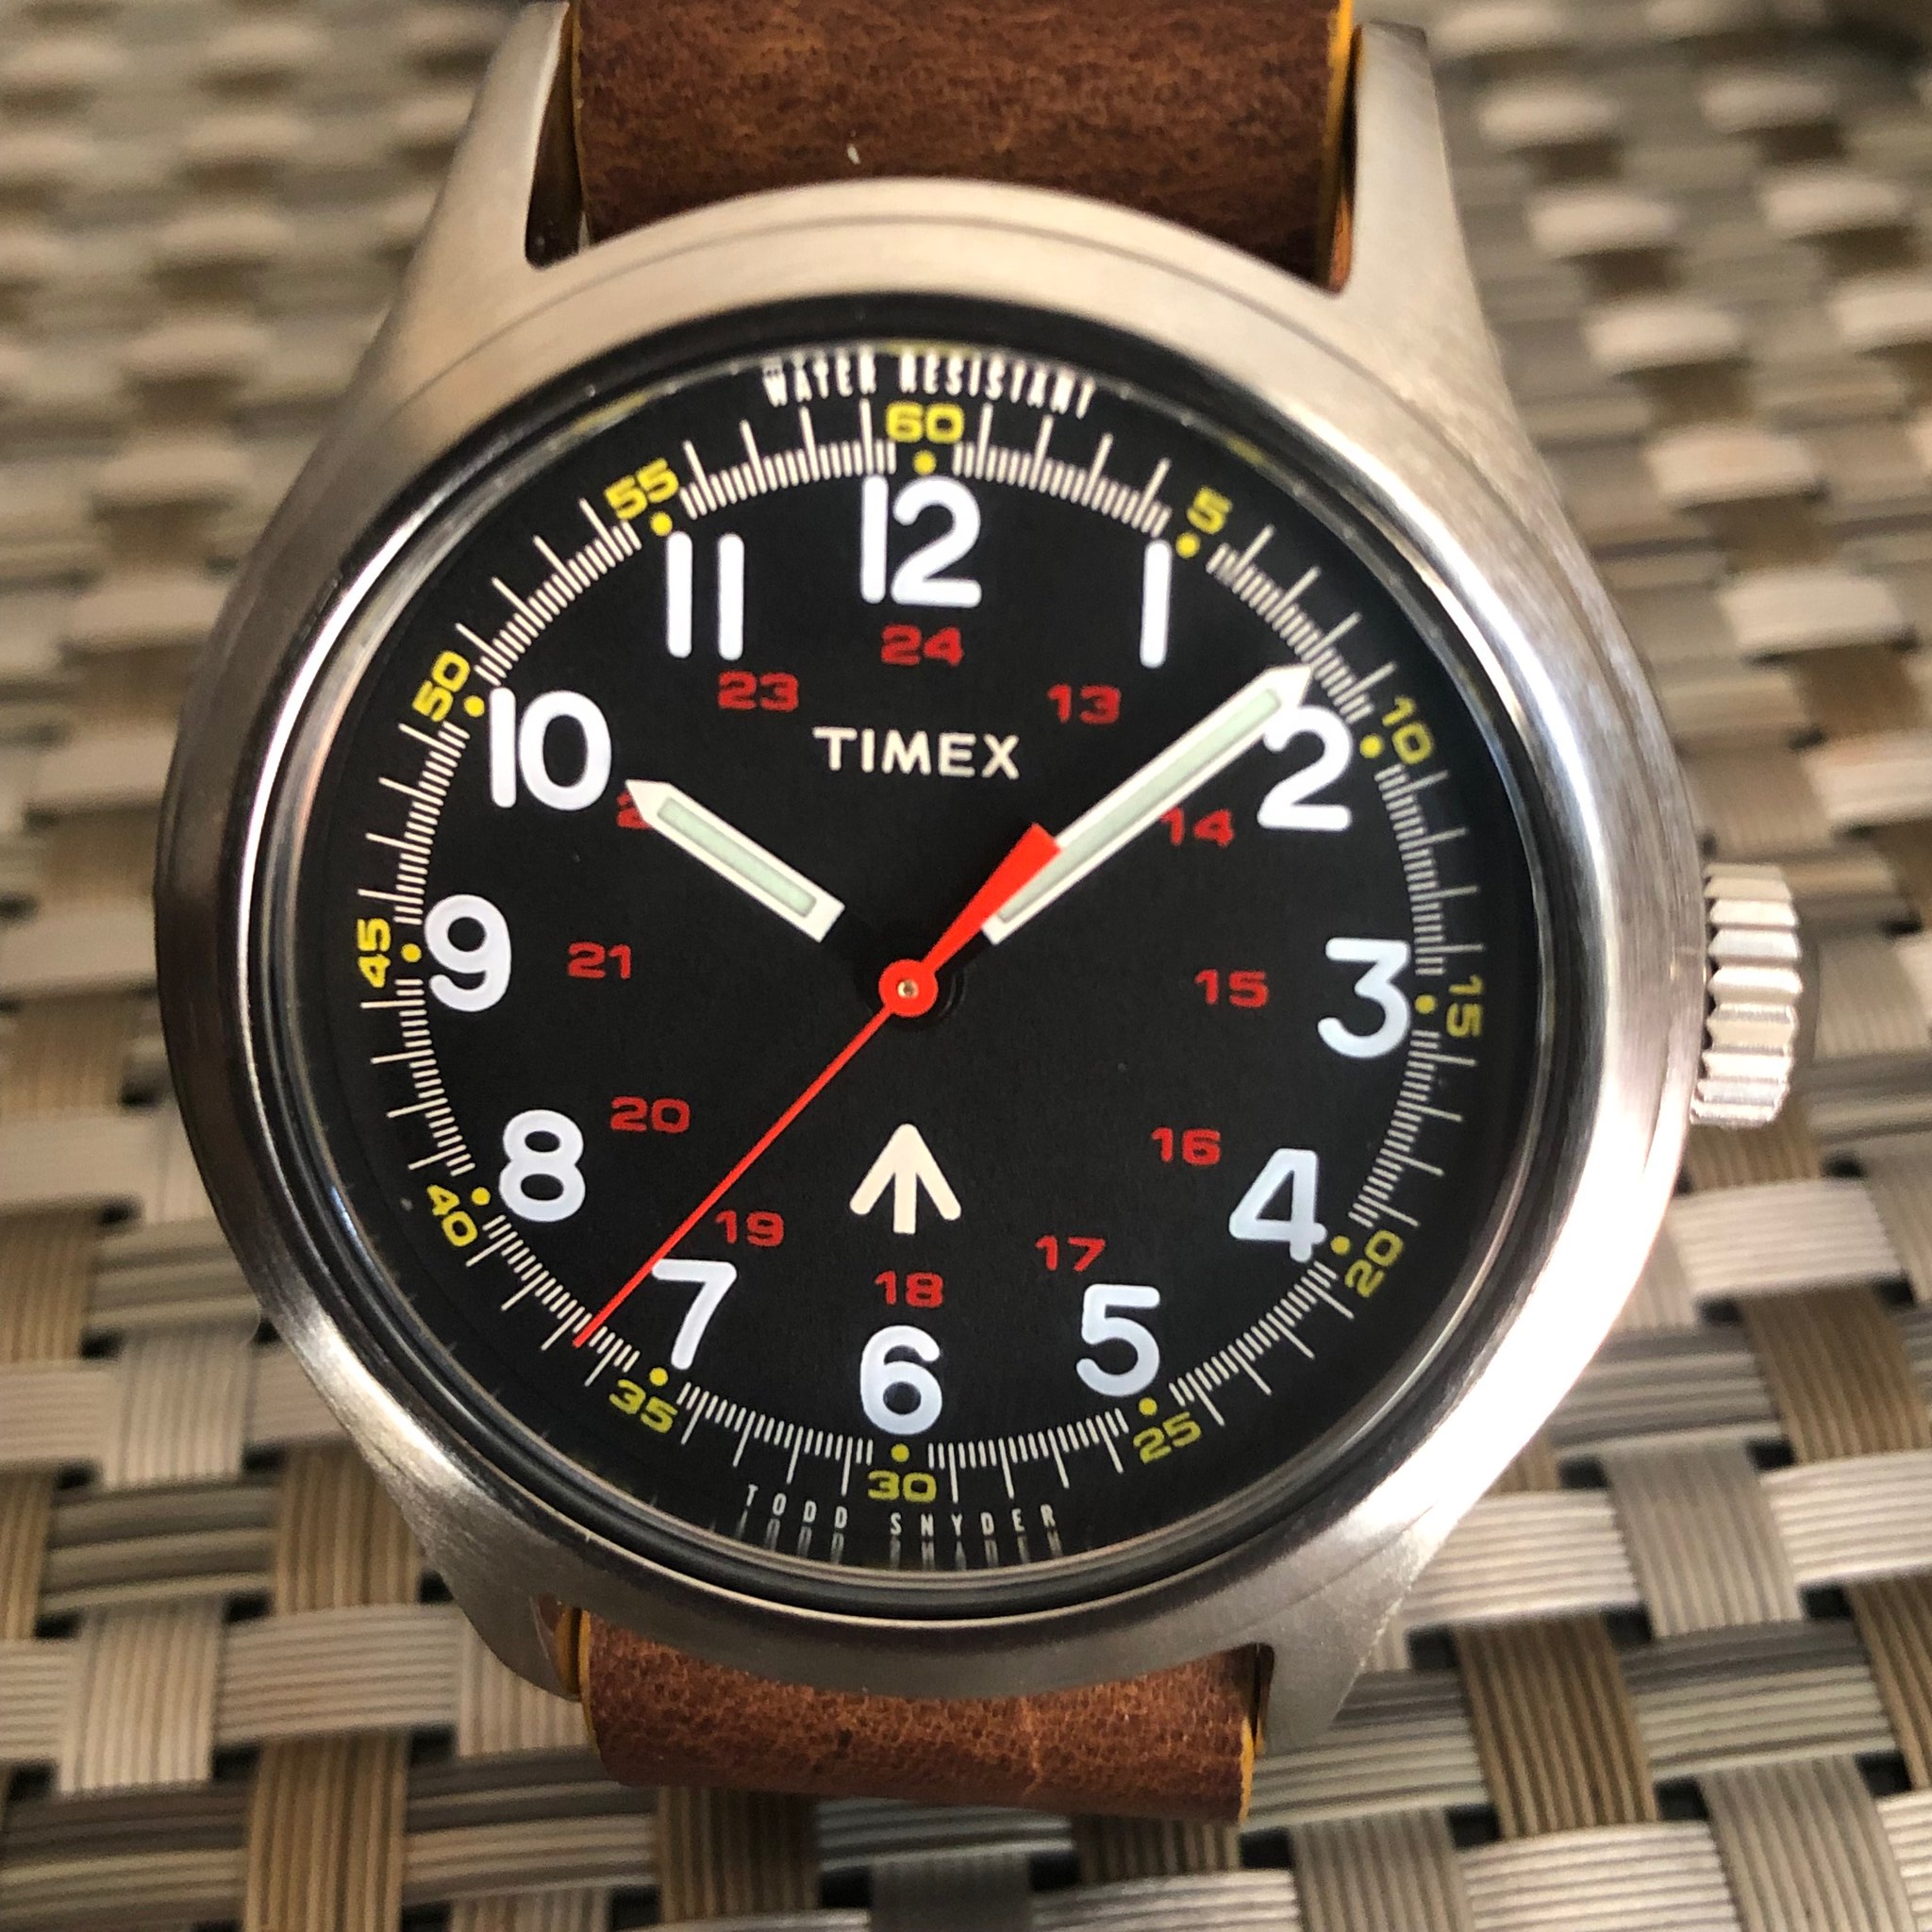 Todd Snyder Military Inspired Mini Review | WatchUSeek Watch Forums